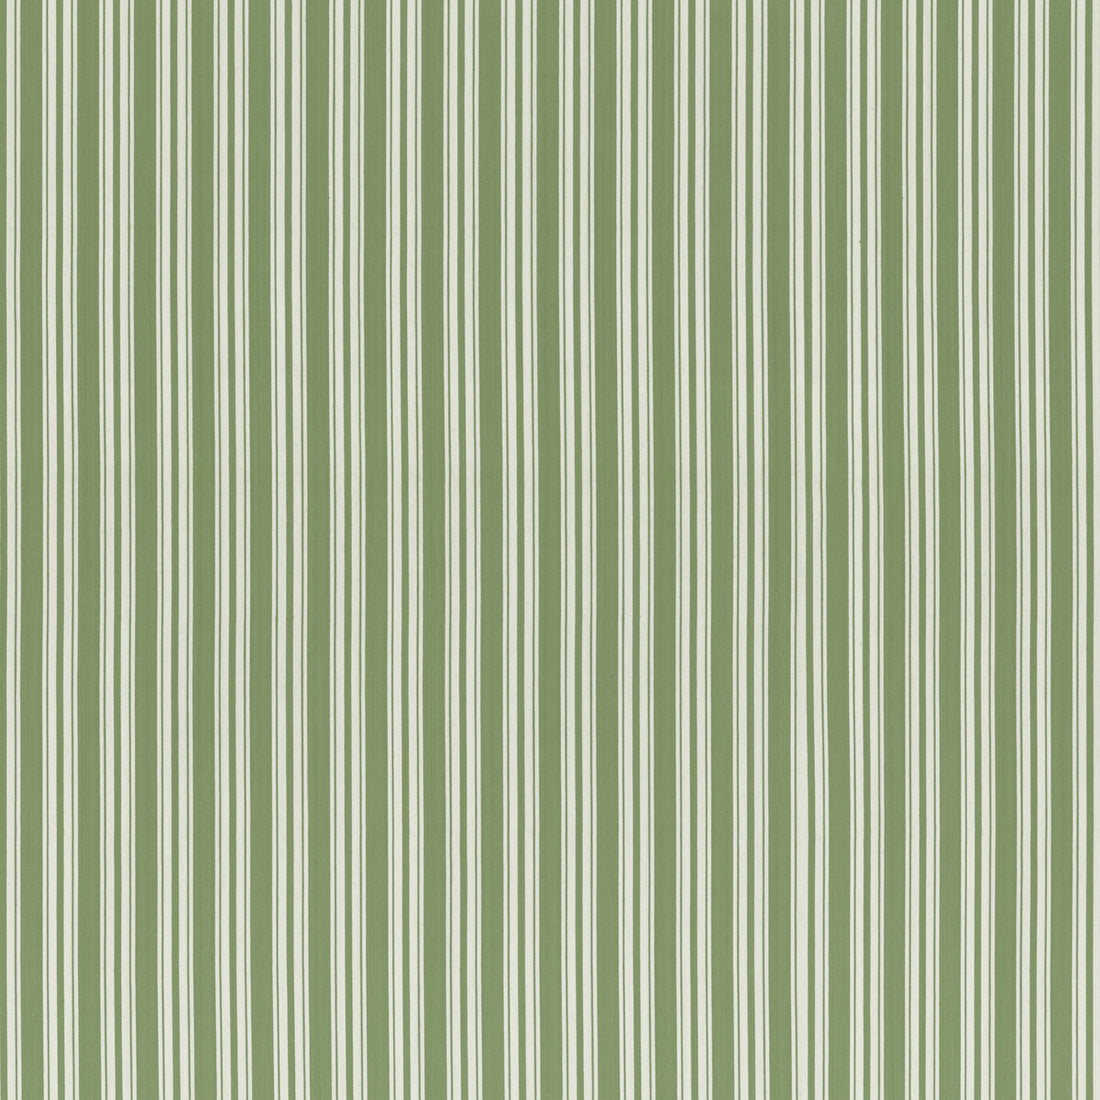 Selune Stripe fabric in green color - pattern 8022118.3.0 - by Brunschwig &amp; Fils in the Normant Checks And Stripes II collection